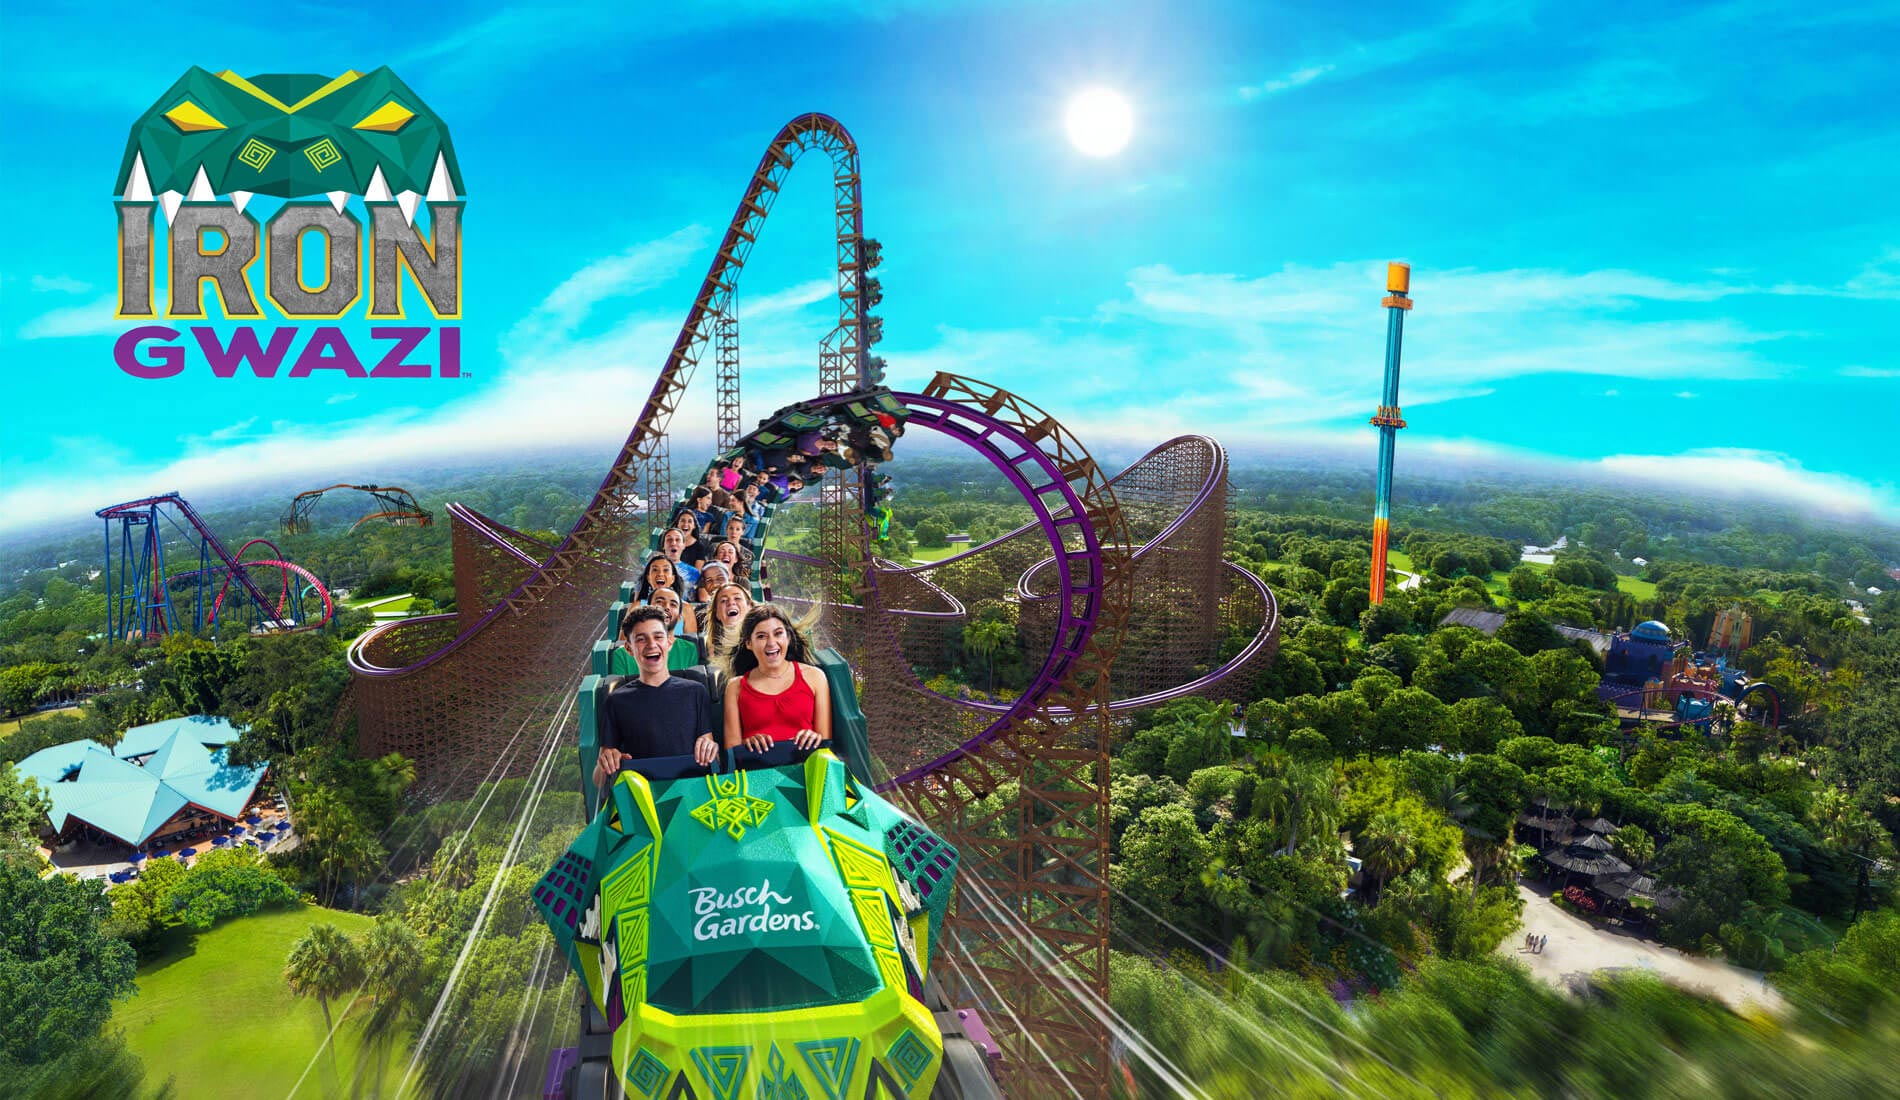 Here are the new attractions coming to Central Florida theme parks